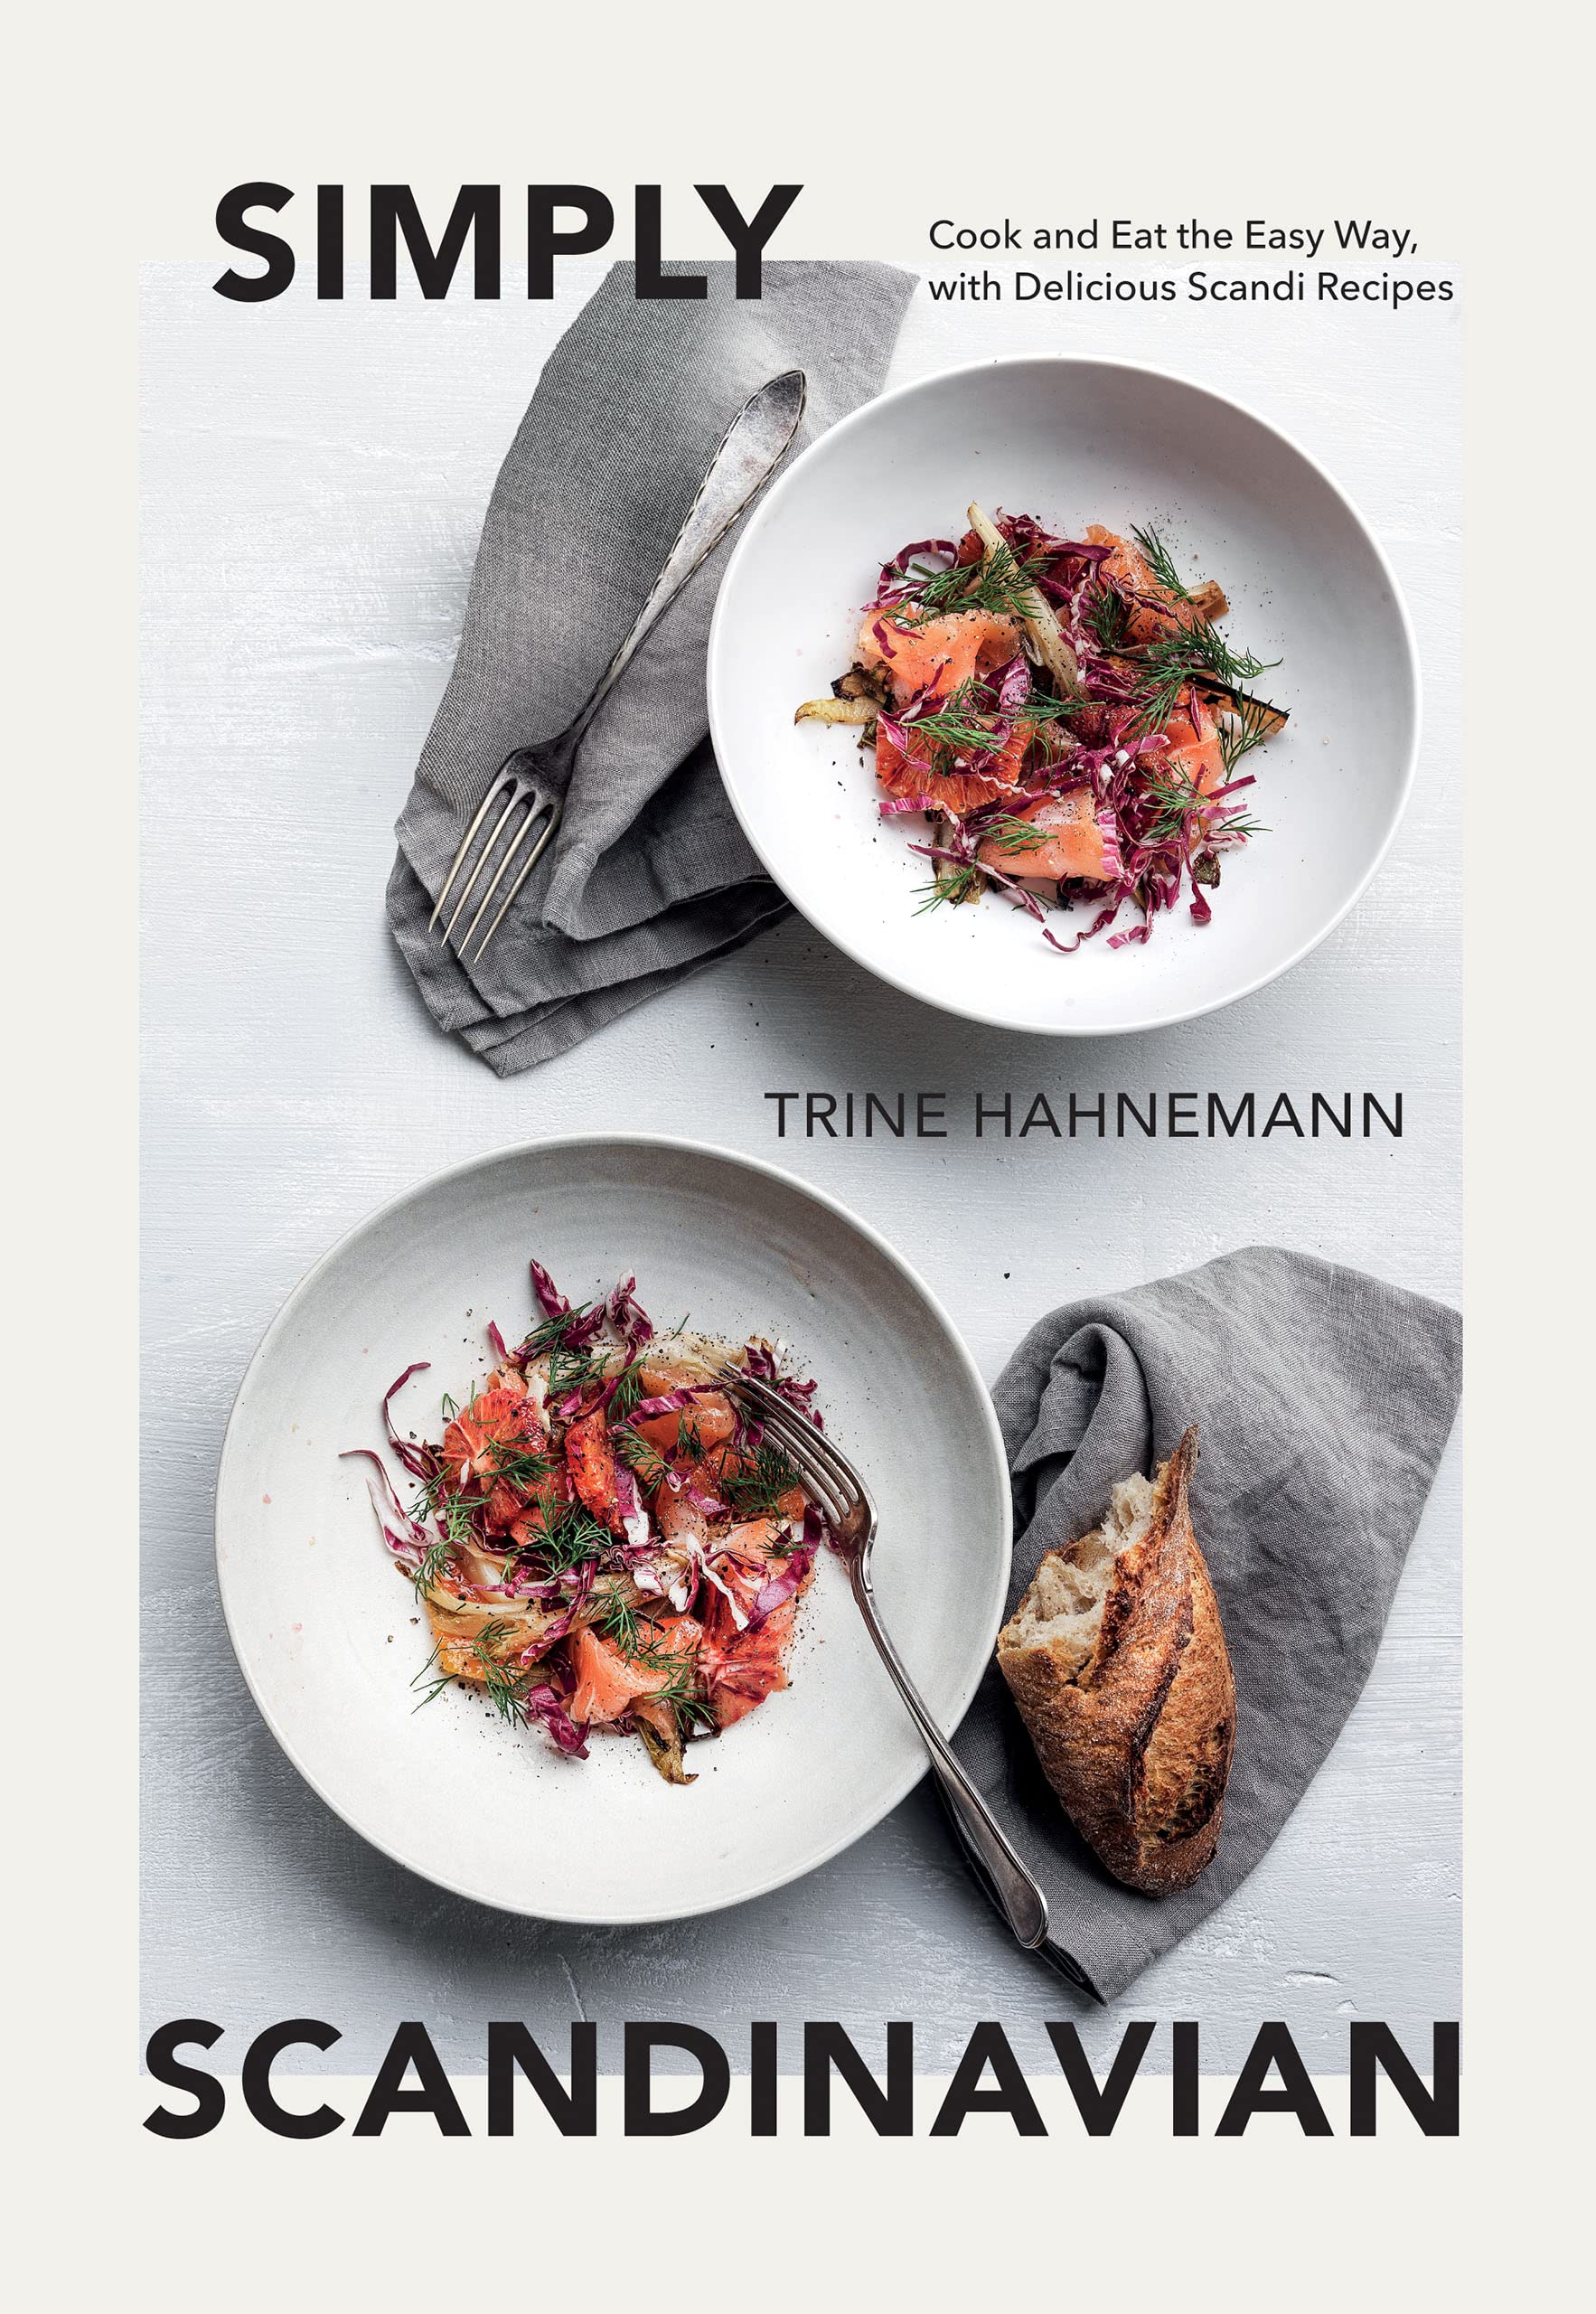 Simply Scandinavian: Cook and Eat the Easy Way, with Delicious Scandi Recipes (Trine Hahnemann)